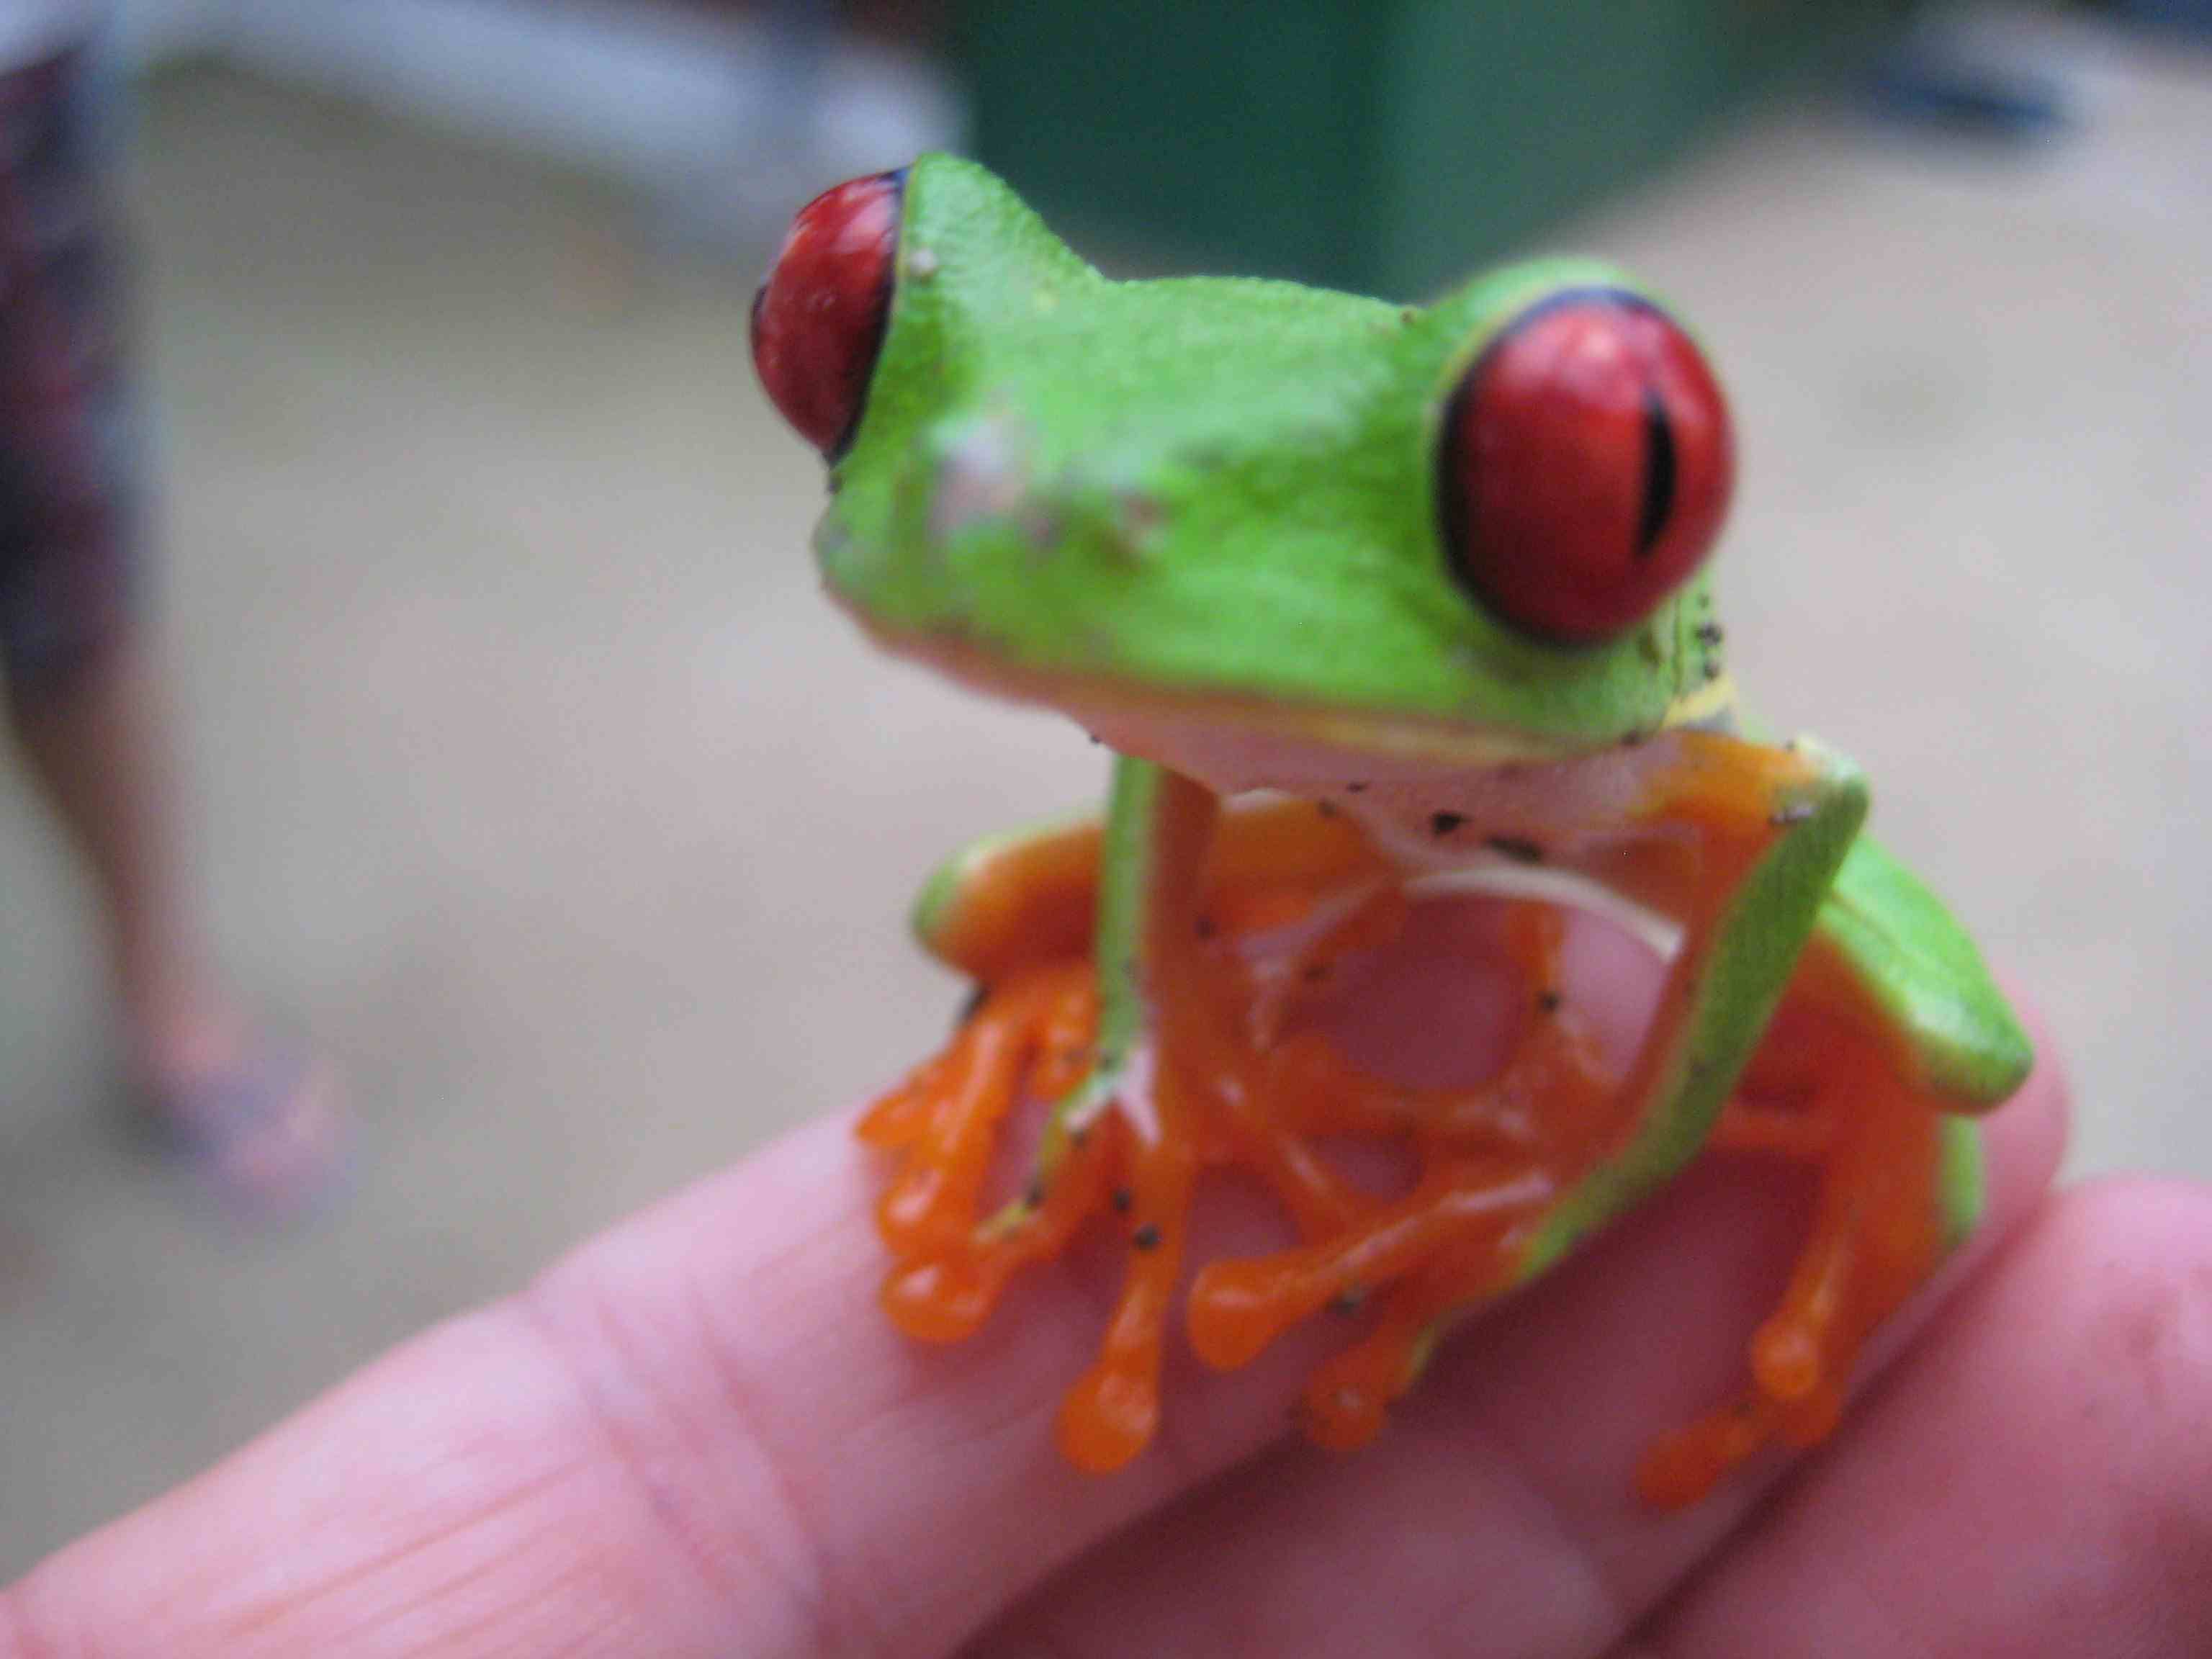 Red Eye Tree frog for sale | Classroom | Pinterest | Tree frogs ...